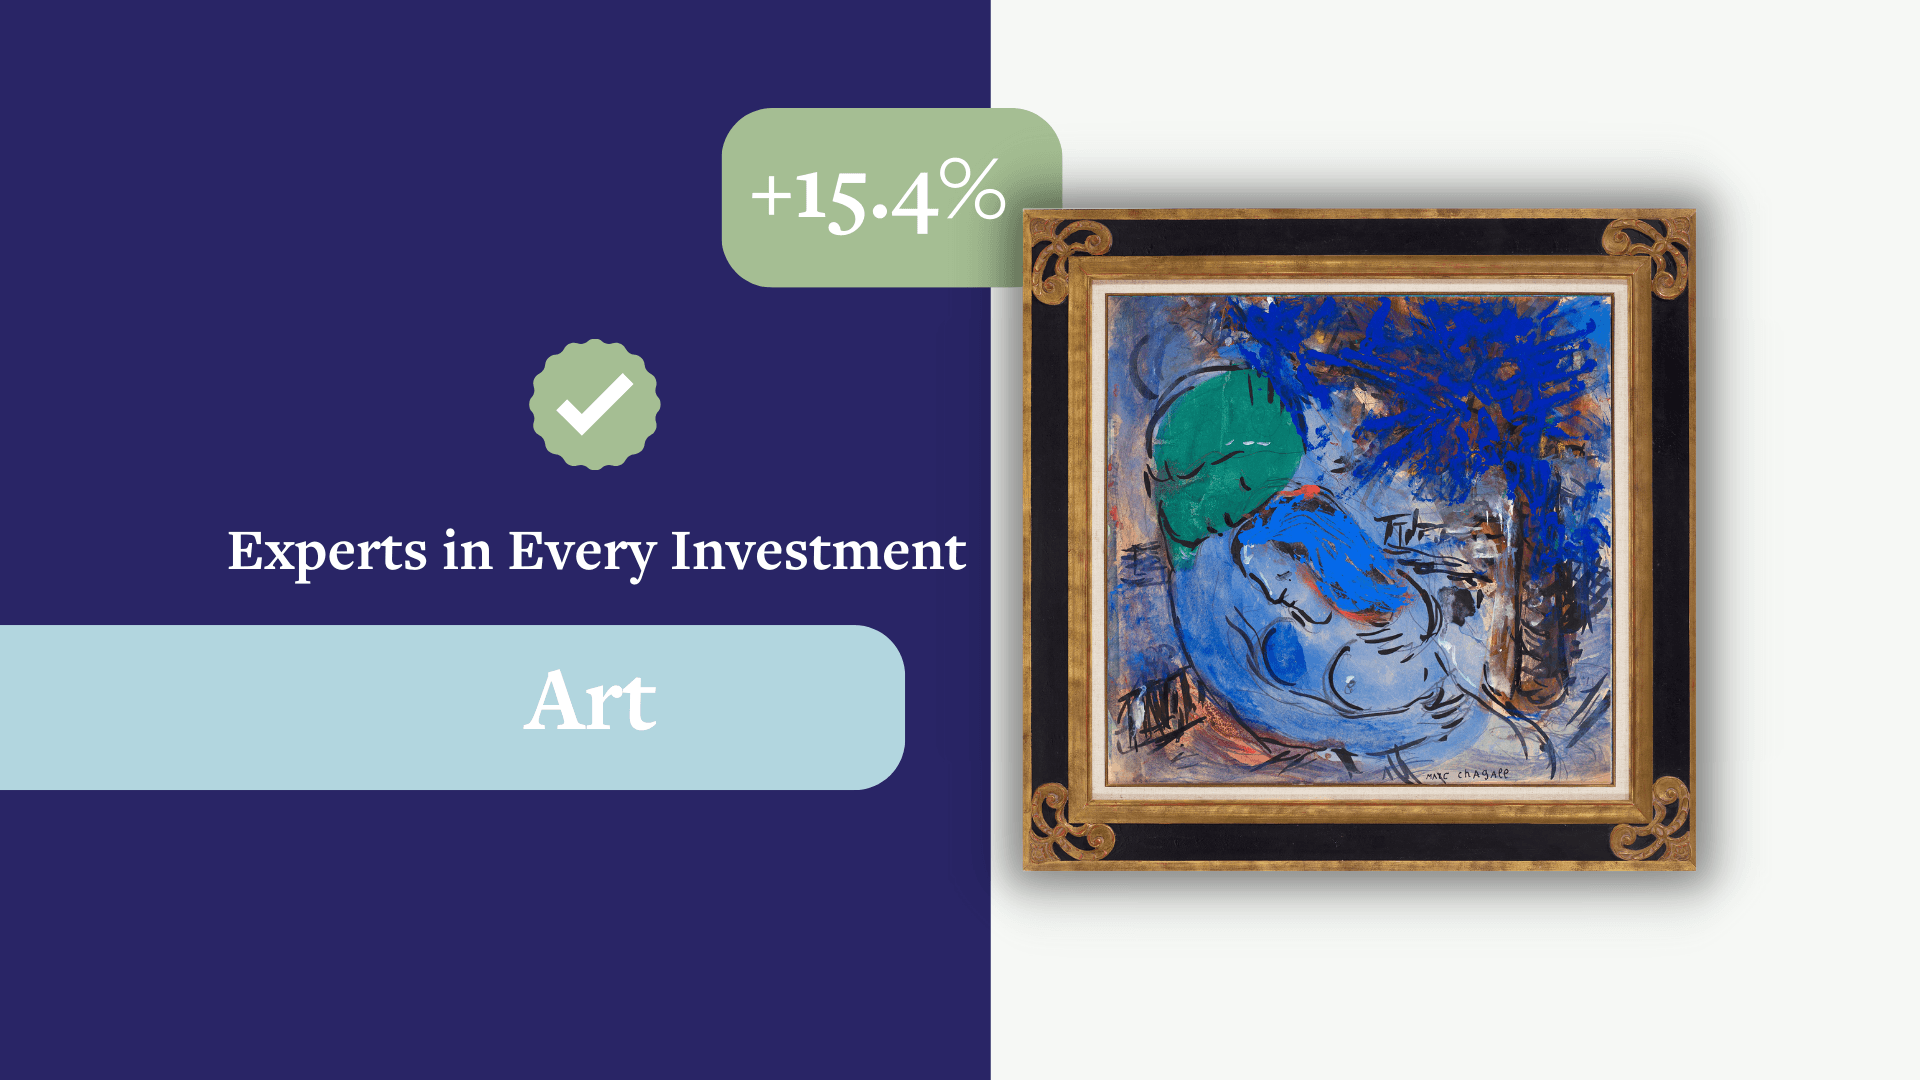 ✅ Experts in Every Investment: Art